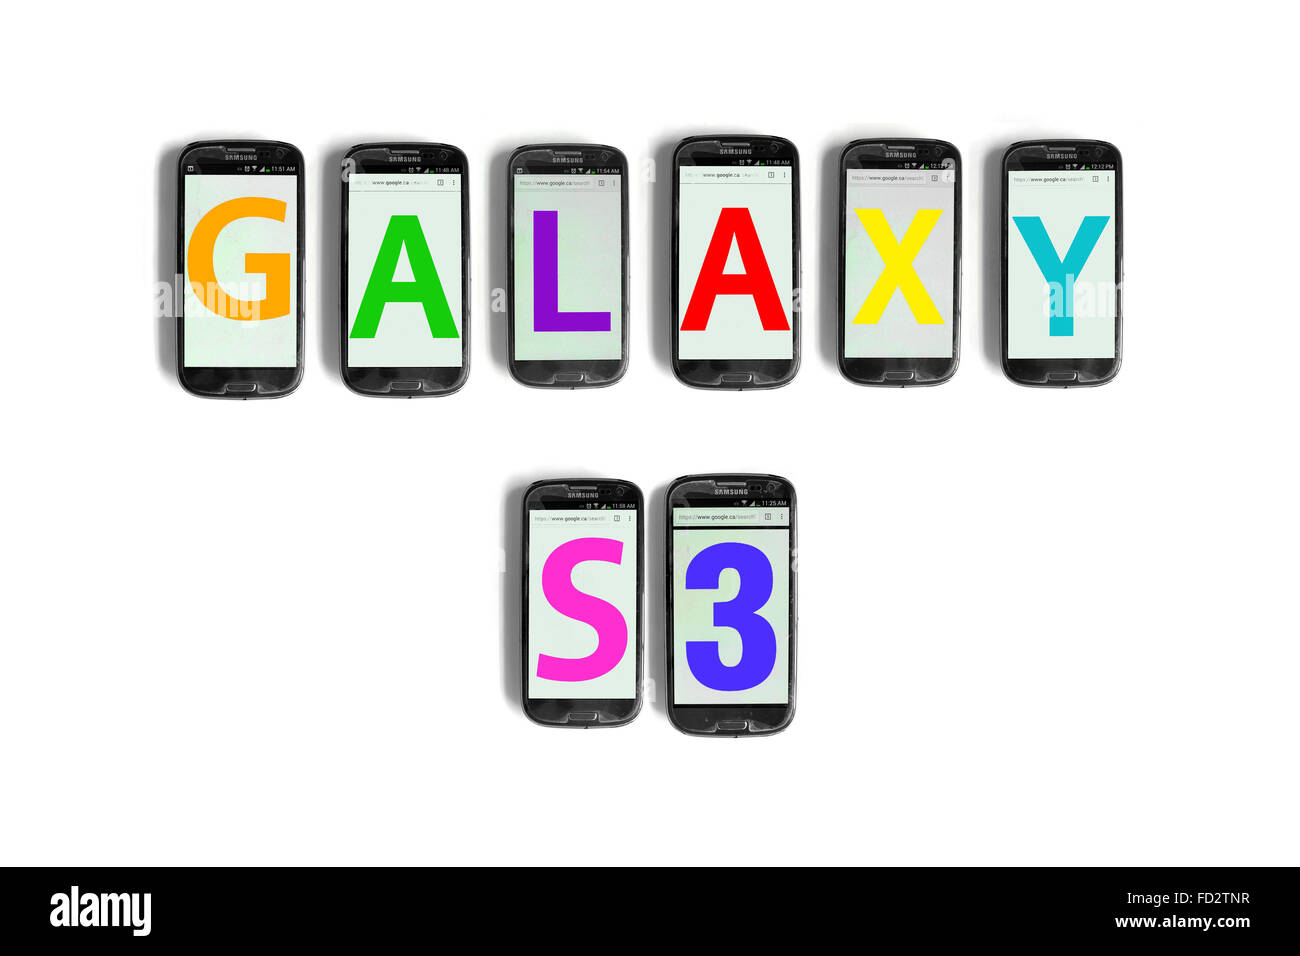 Galaxy S3 written on the screens of smartphones photographed against a white background. Stock Photo